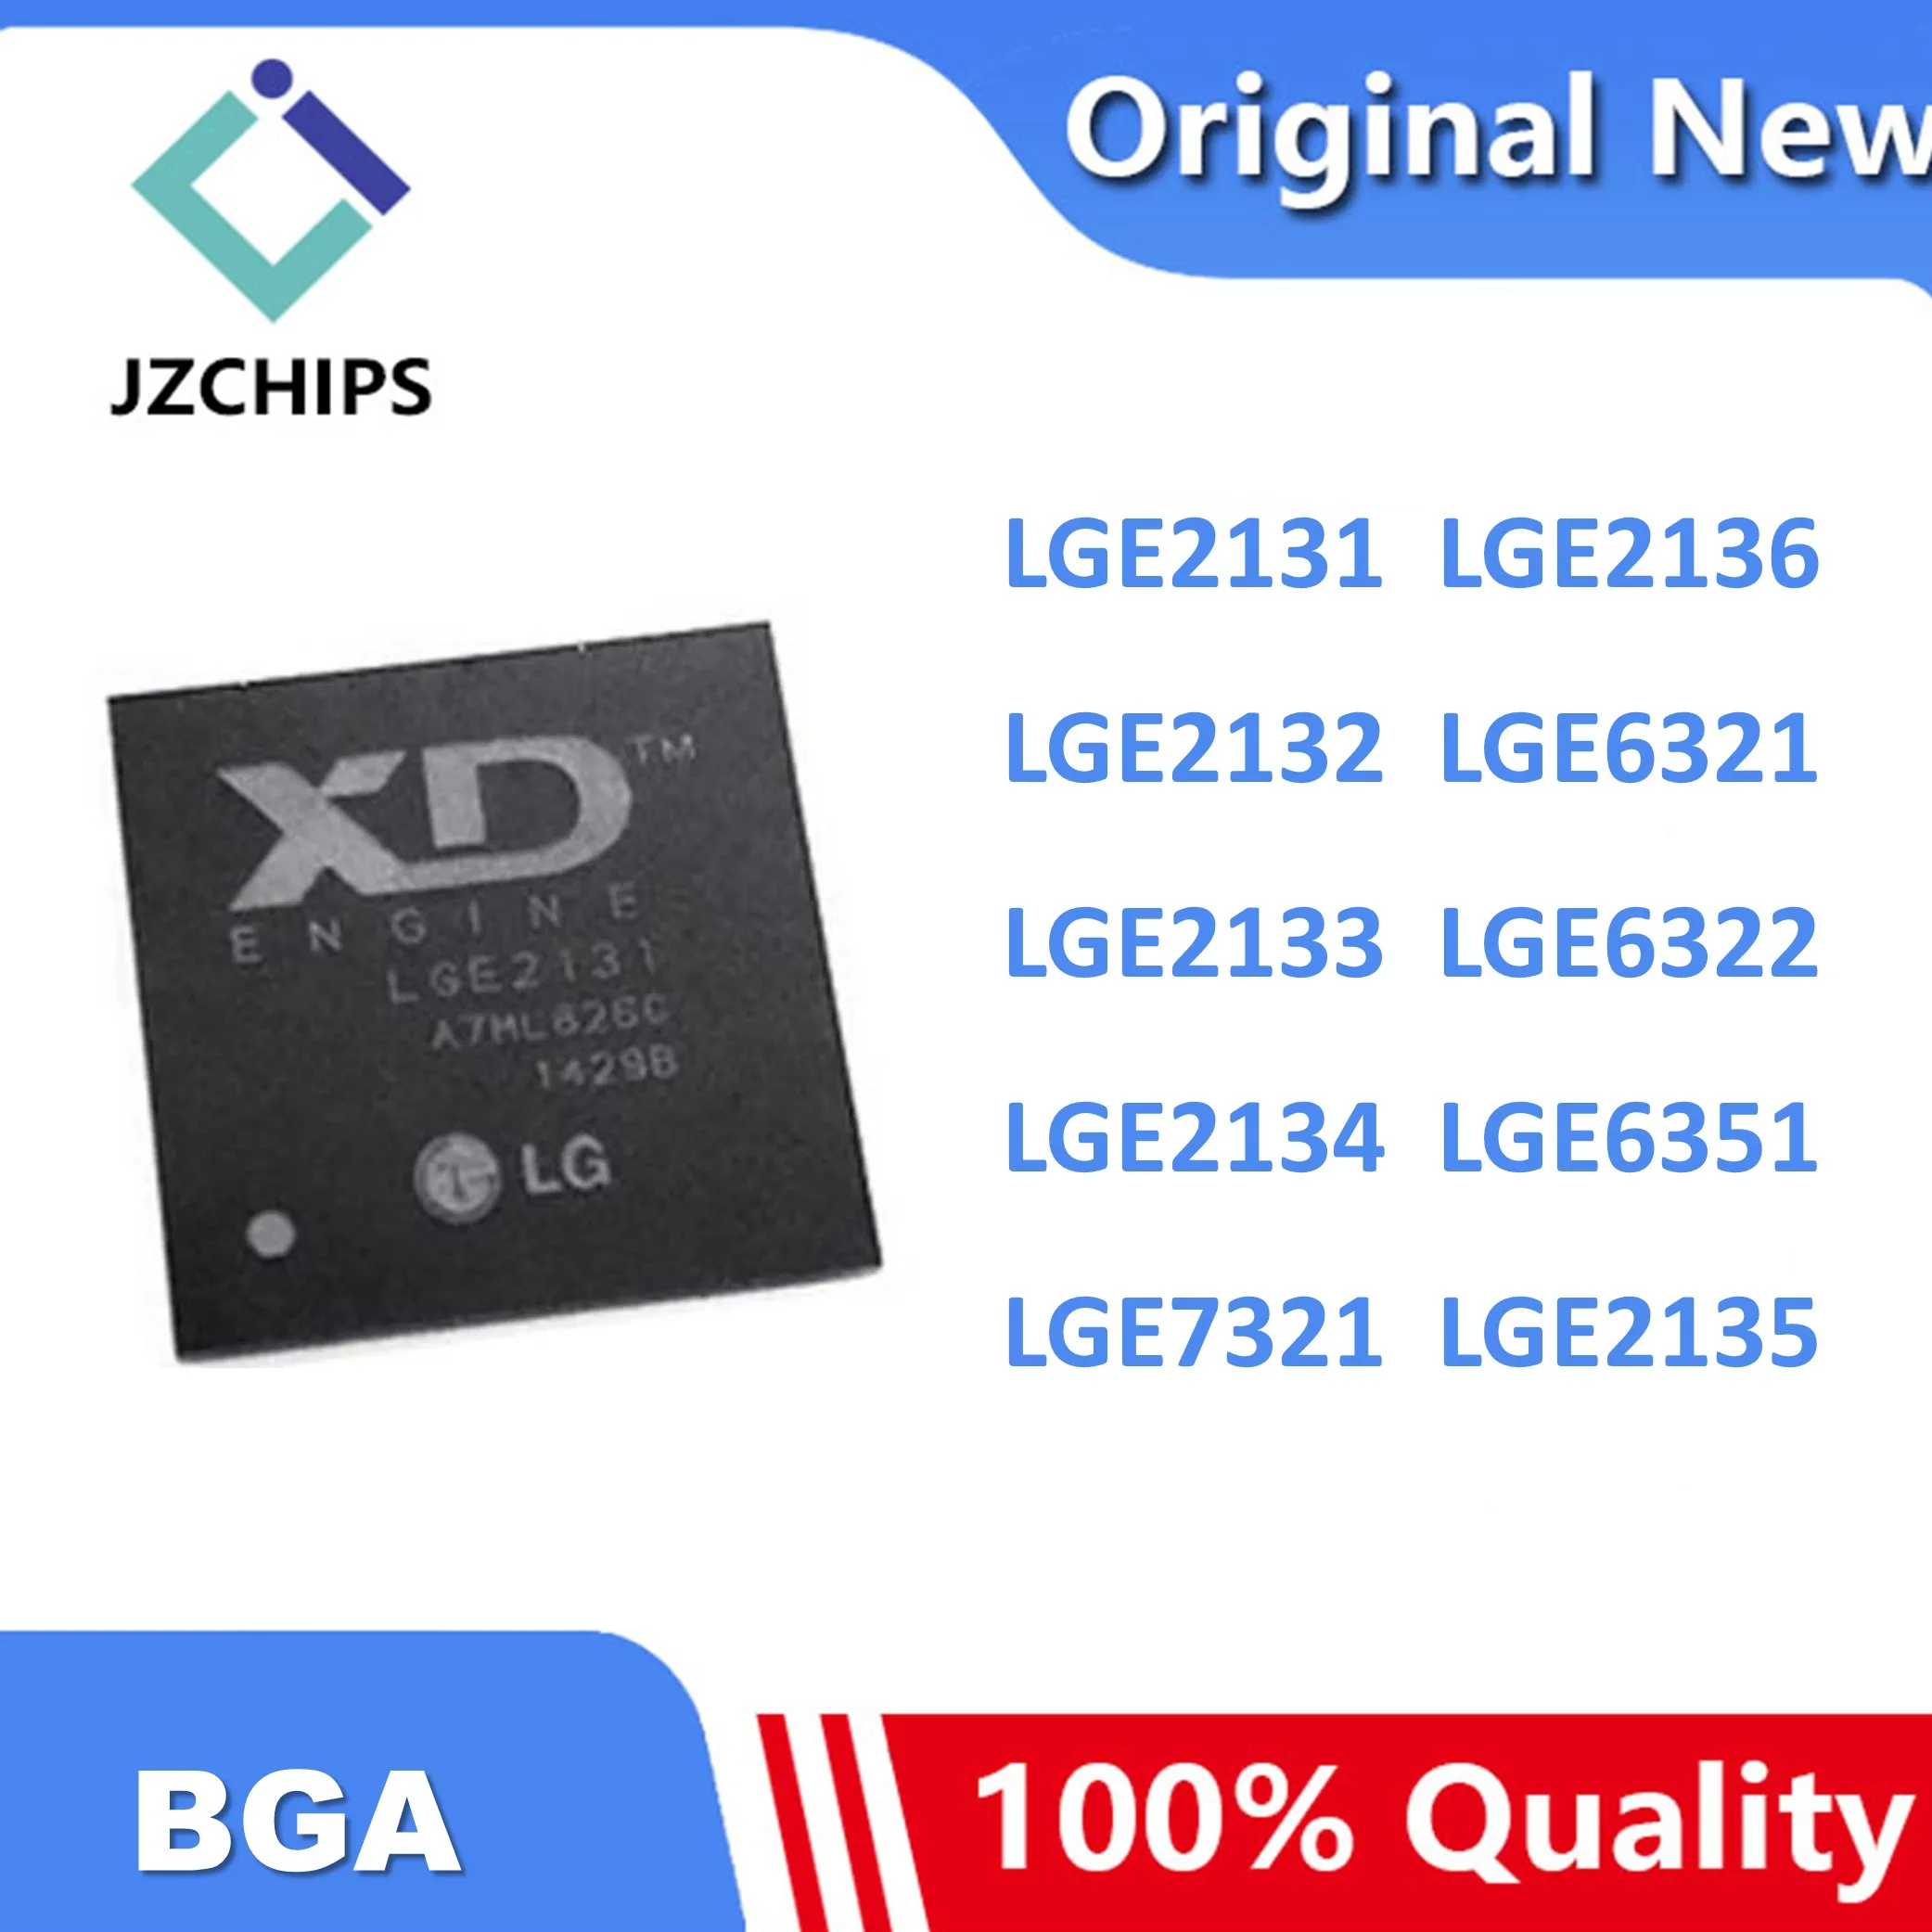 

100% New LGE2131 LGE2132 LGE2133 LGE2134 LGE2135 LGE2136 LGE6321 LGE6322 LGE6351 LGE7321 BGA IC Chipset in stock